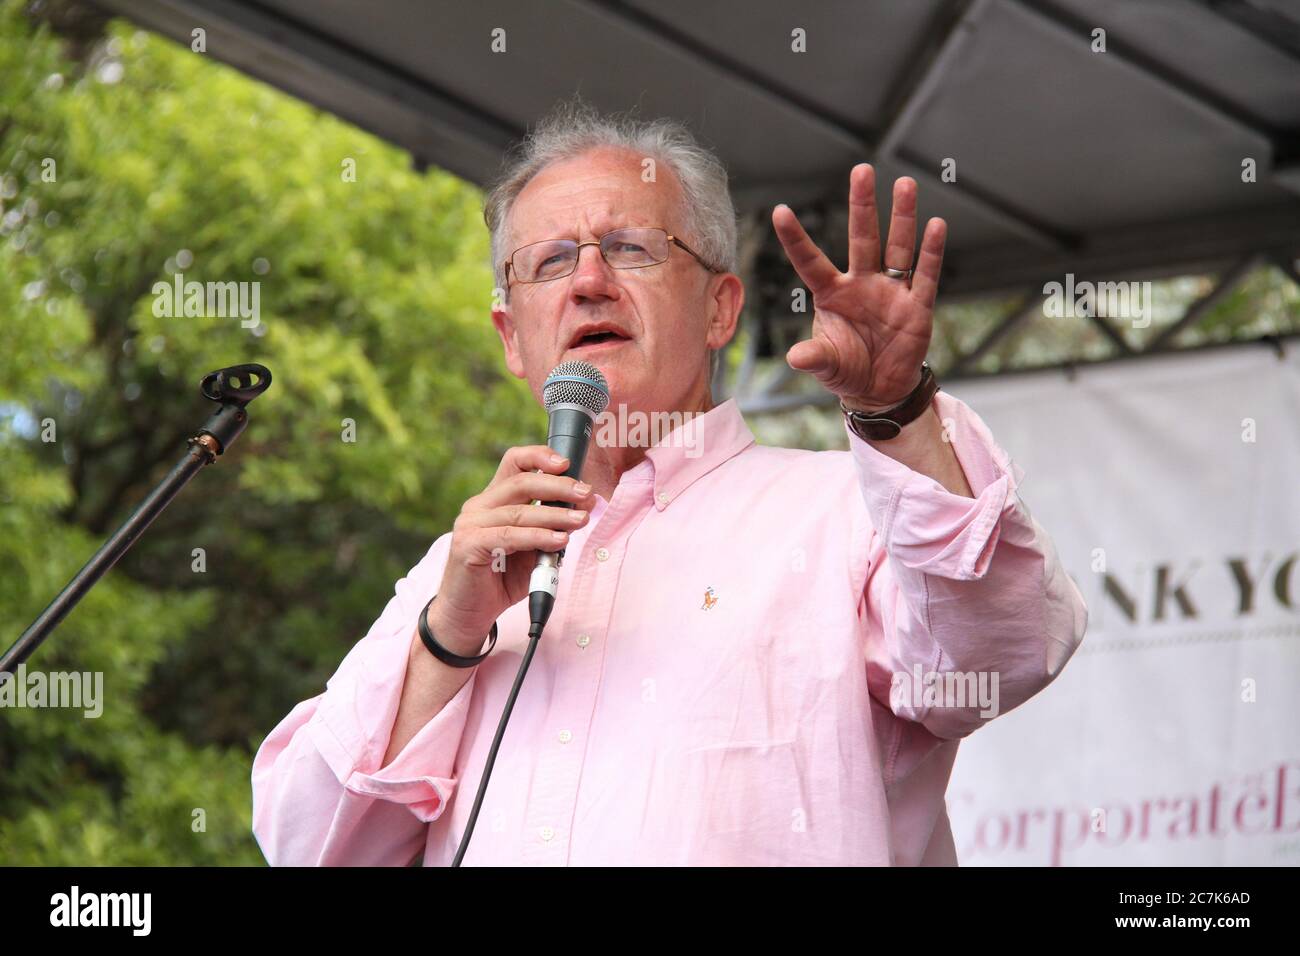 Paul Perini, Senior Minister of St Johns Anglican Church, Glebe, speaking at the official opening of the Glebe Street Fair 2014. Stock Photo